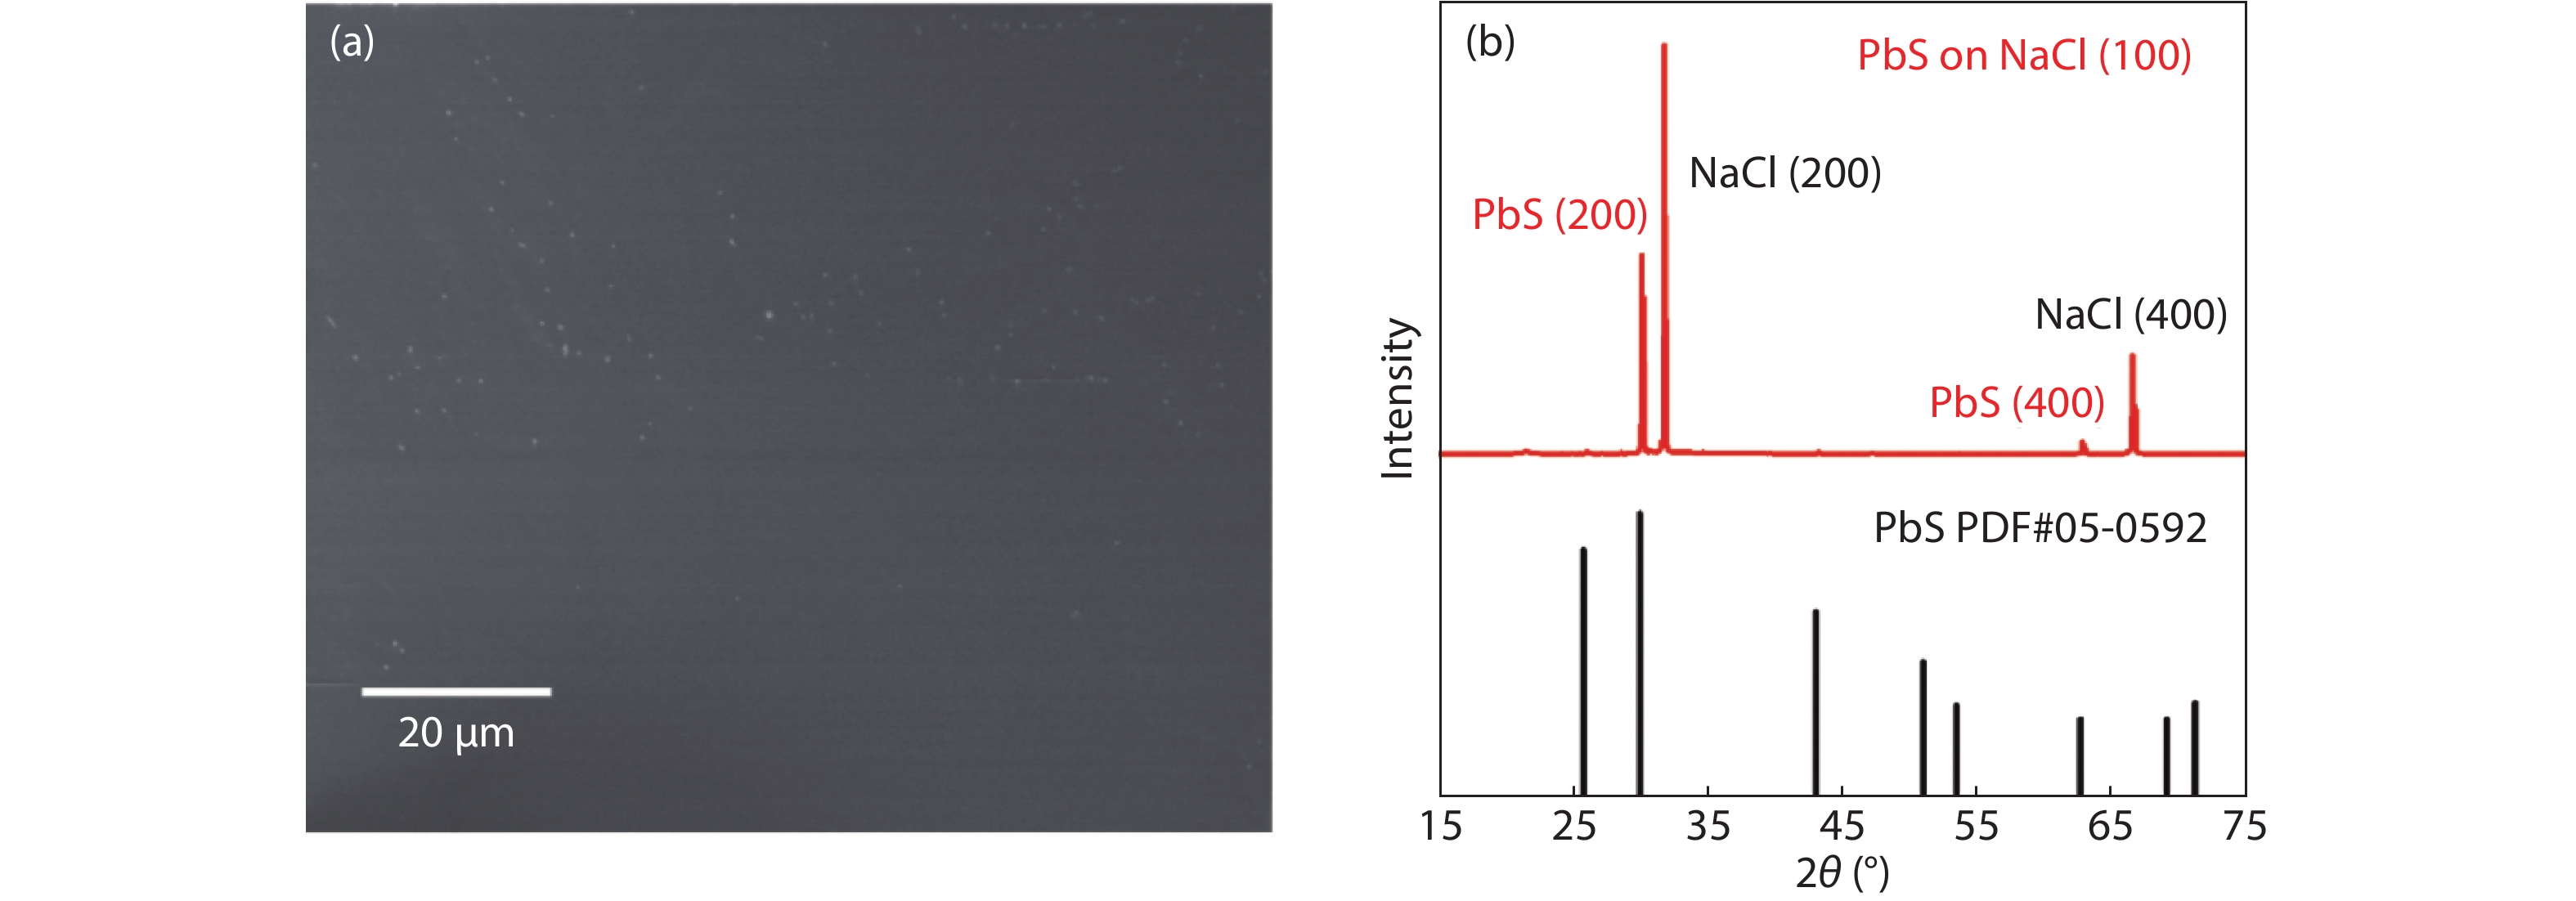 (Color online) (a) SEM image of PbS single-crystal films epitaxially grown on NaCl (100) substrates. (b) XRD patterns of the PbS films on NaCl (100) crystals (red) and reference data (JPCDS, PDF#05-0592, black).